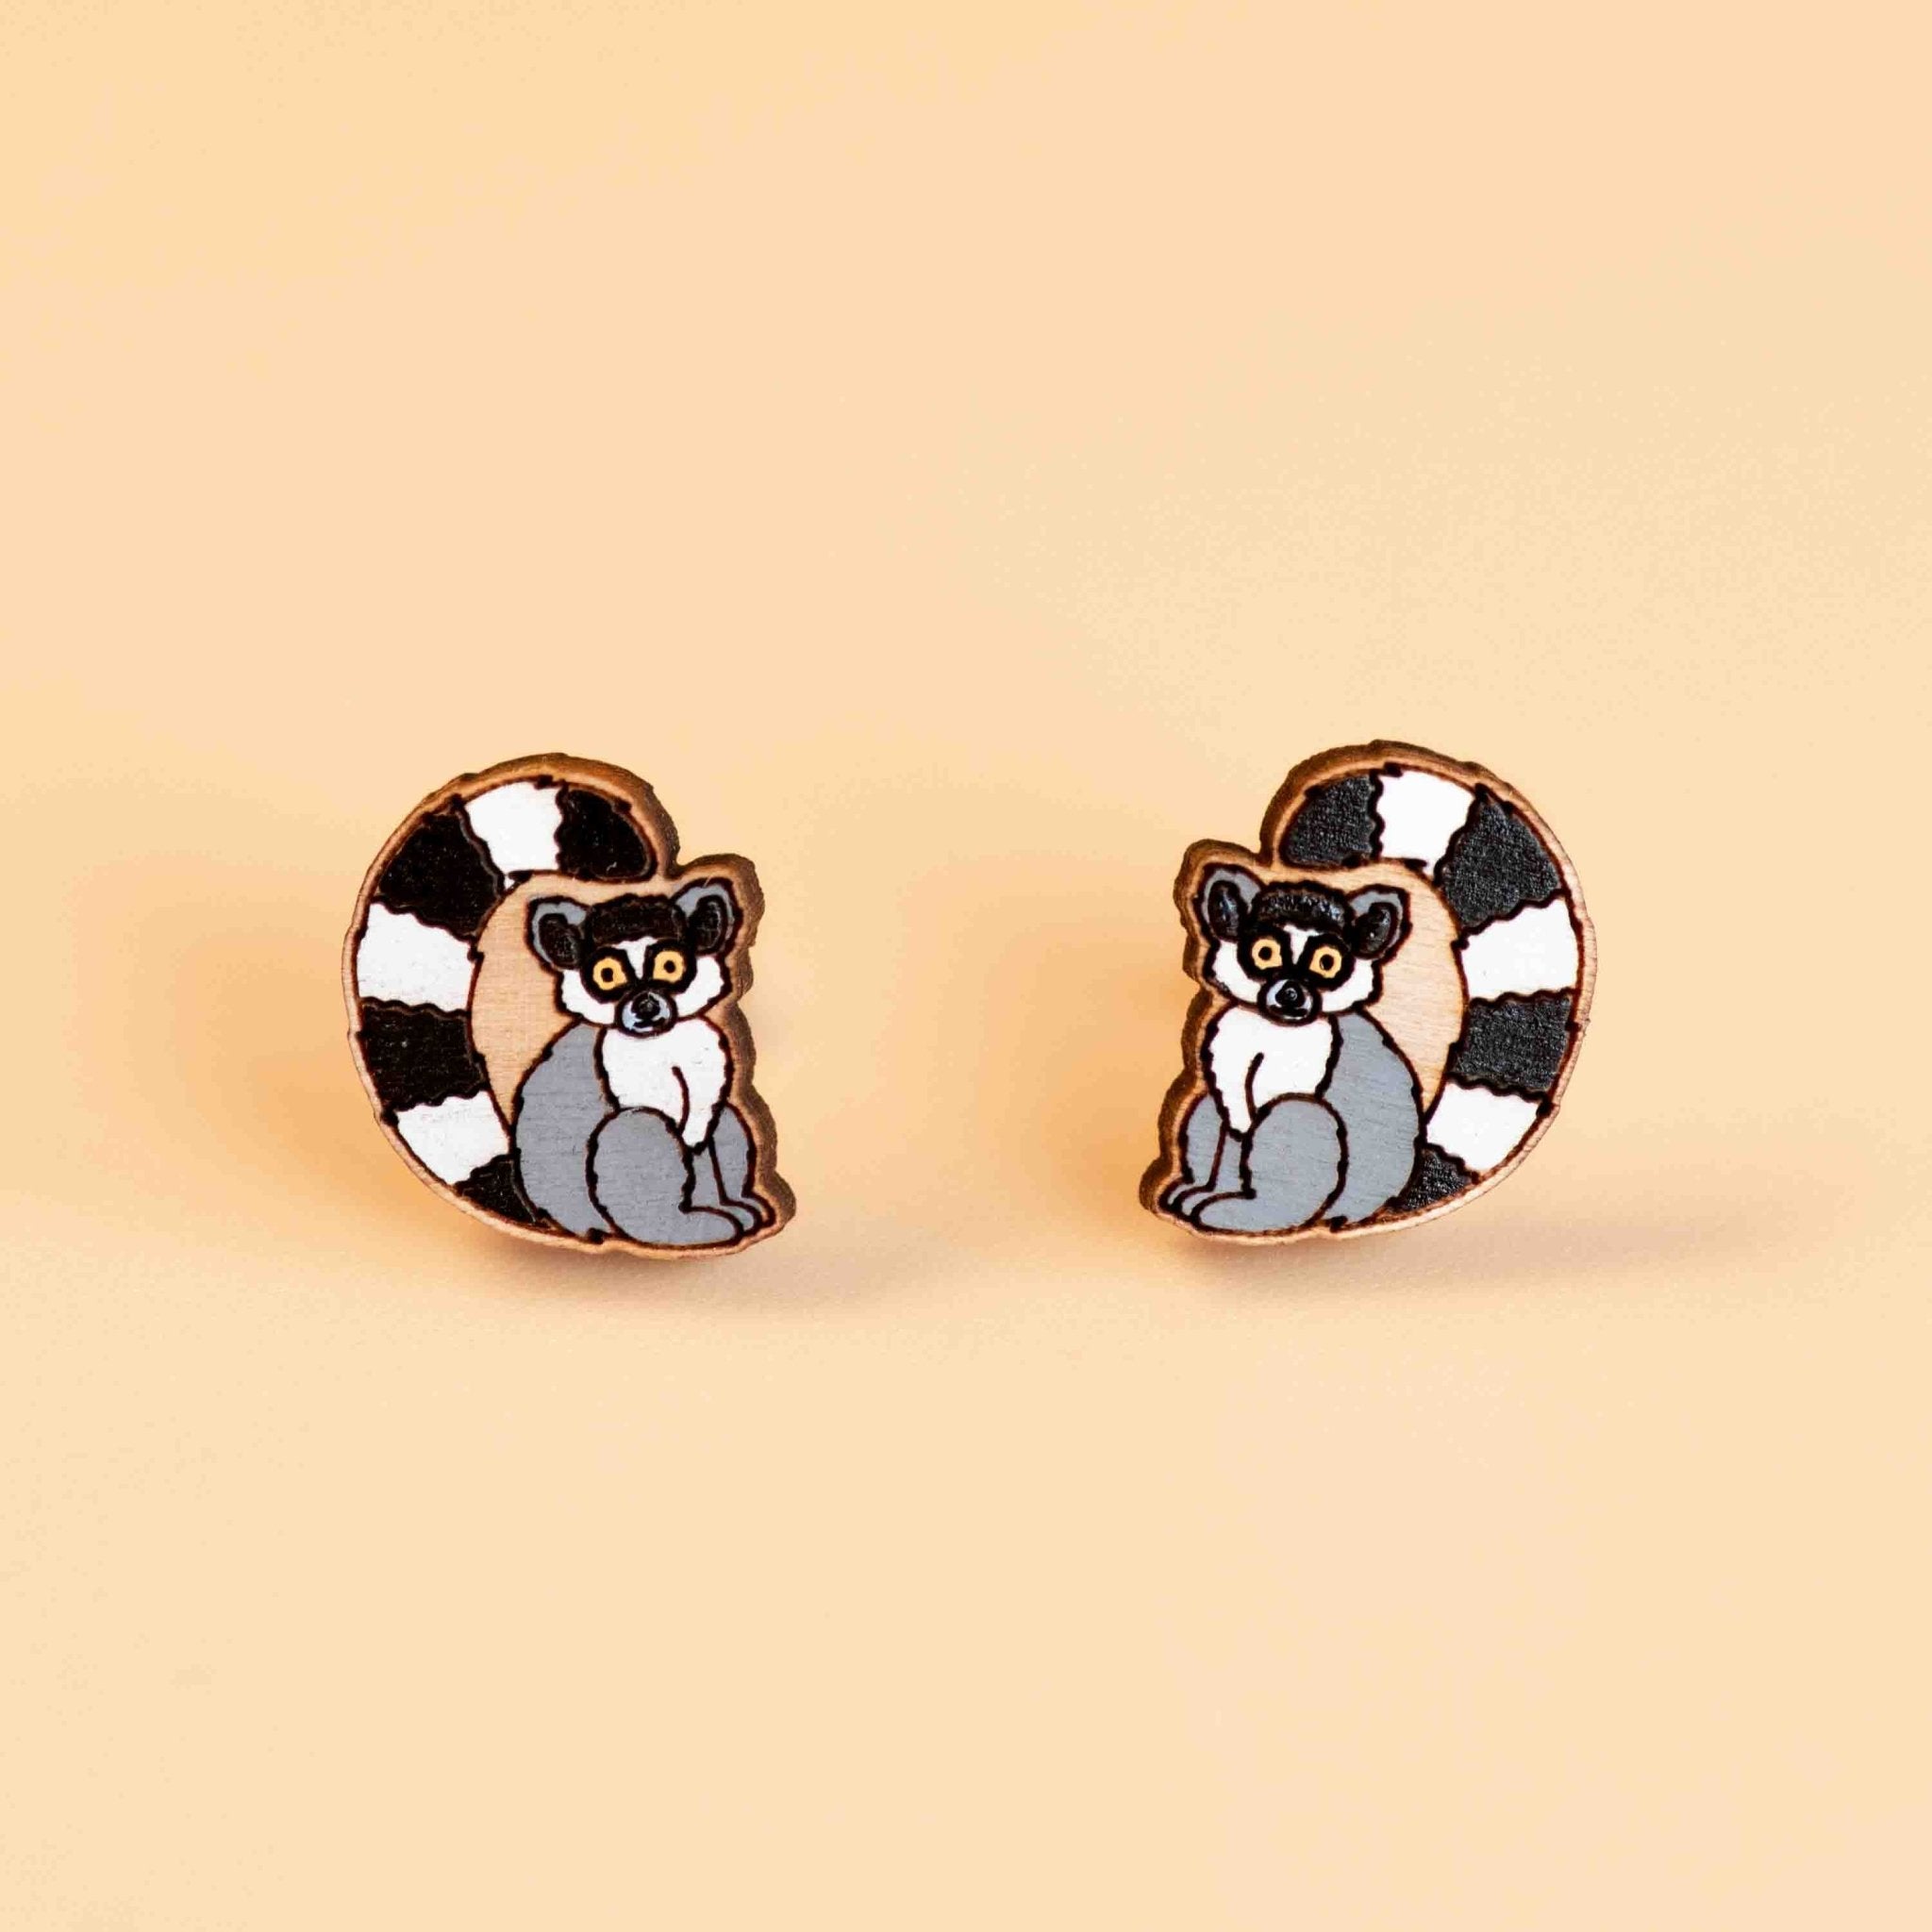 Hand-painted Lemur Earrings Wooden Studs Eco-jewellery - PEL10170 - Robin Valley Official Store